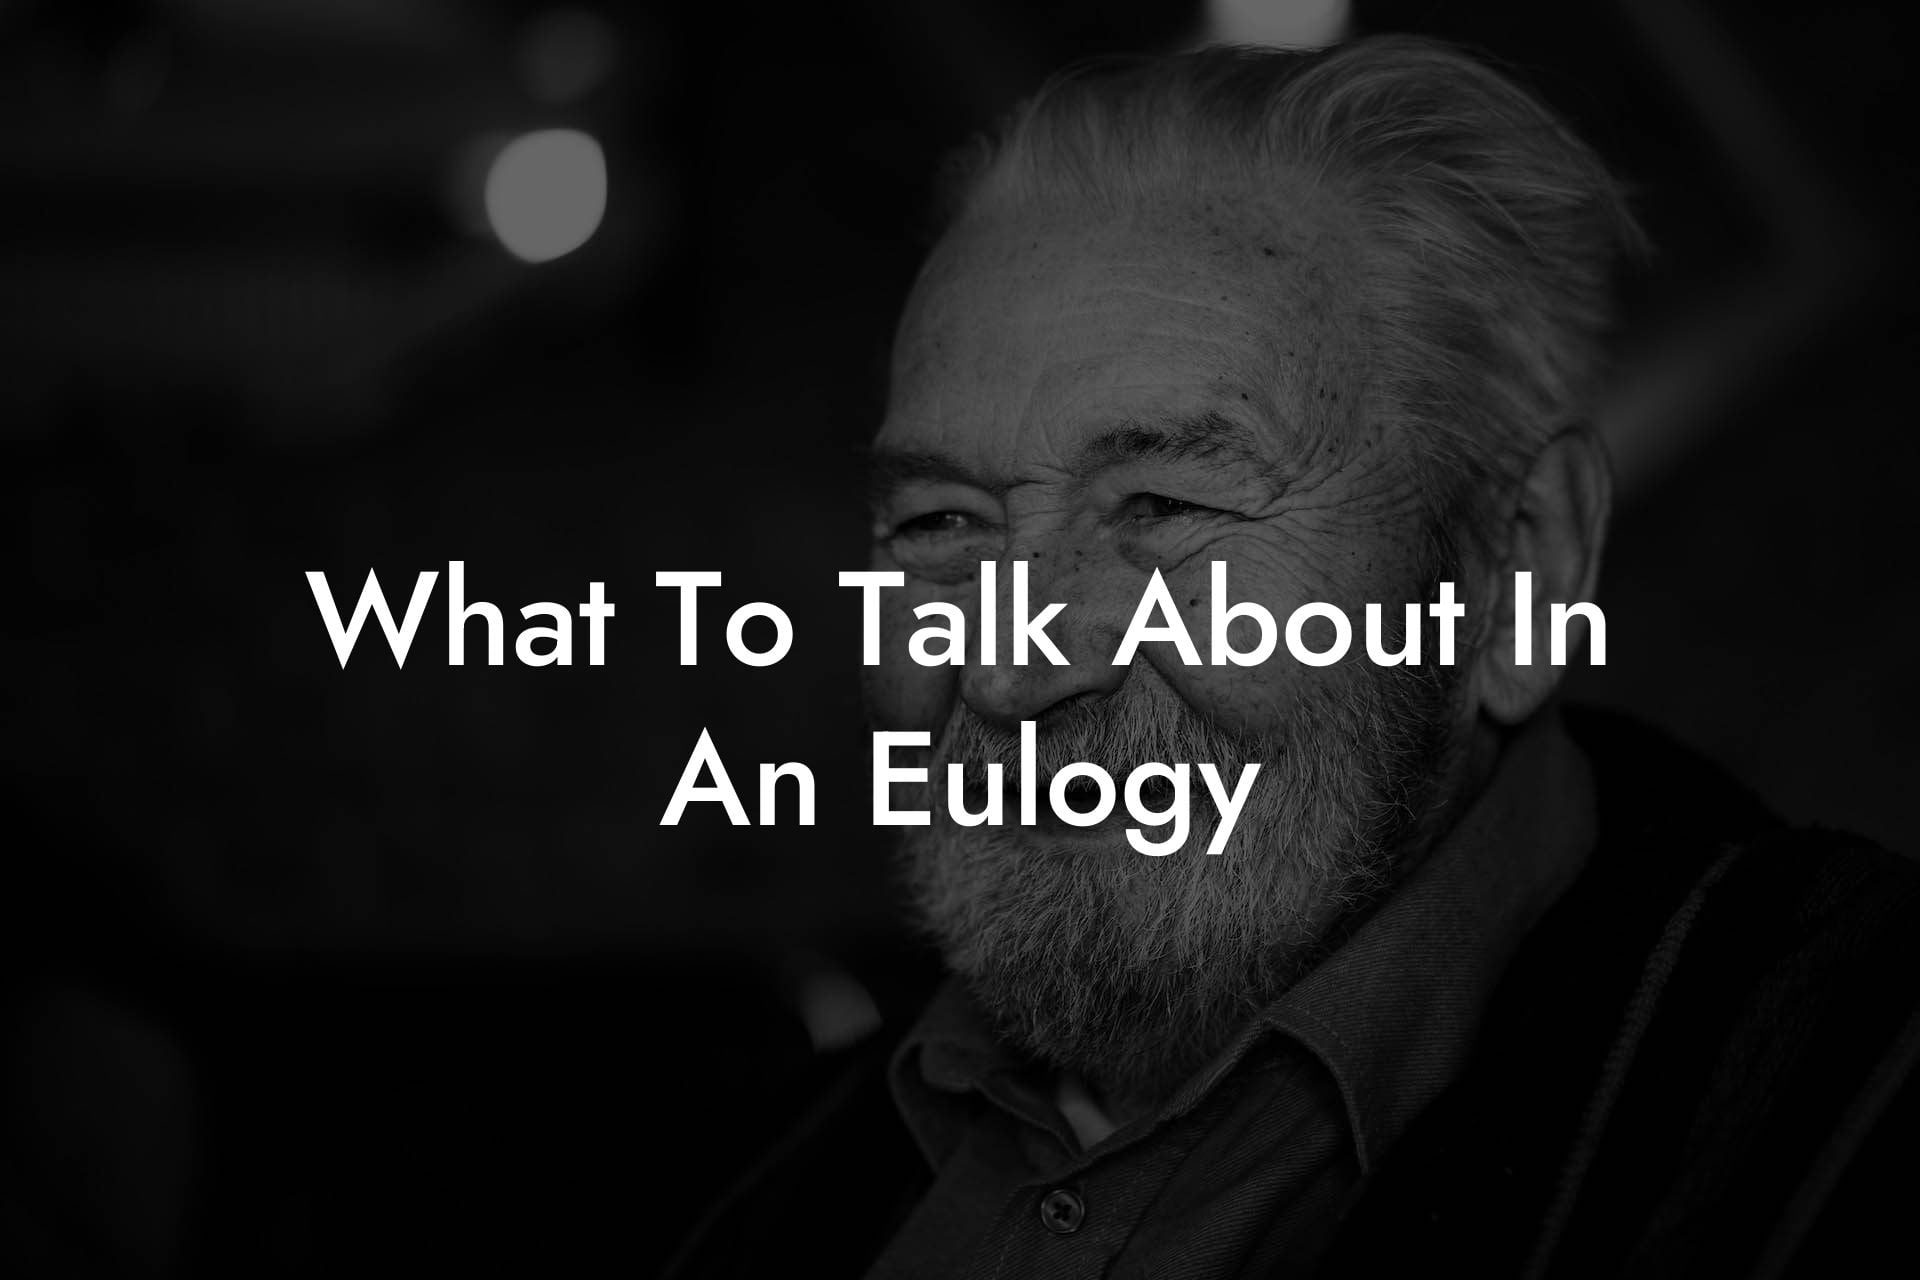 What To Talk About In An Eulogy